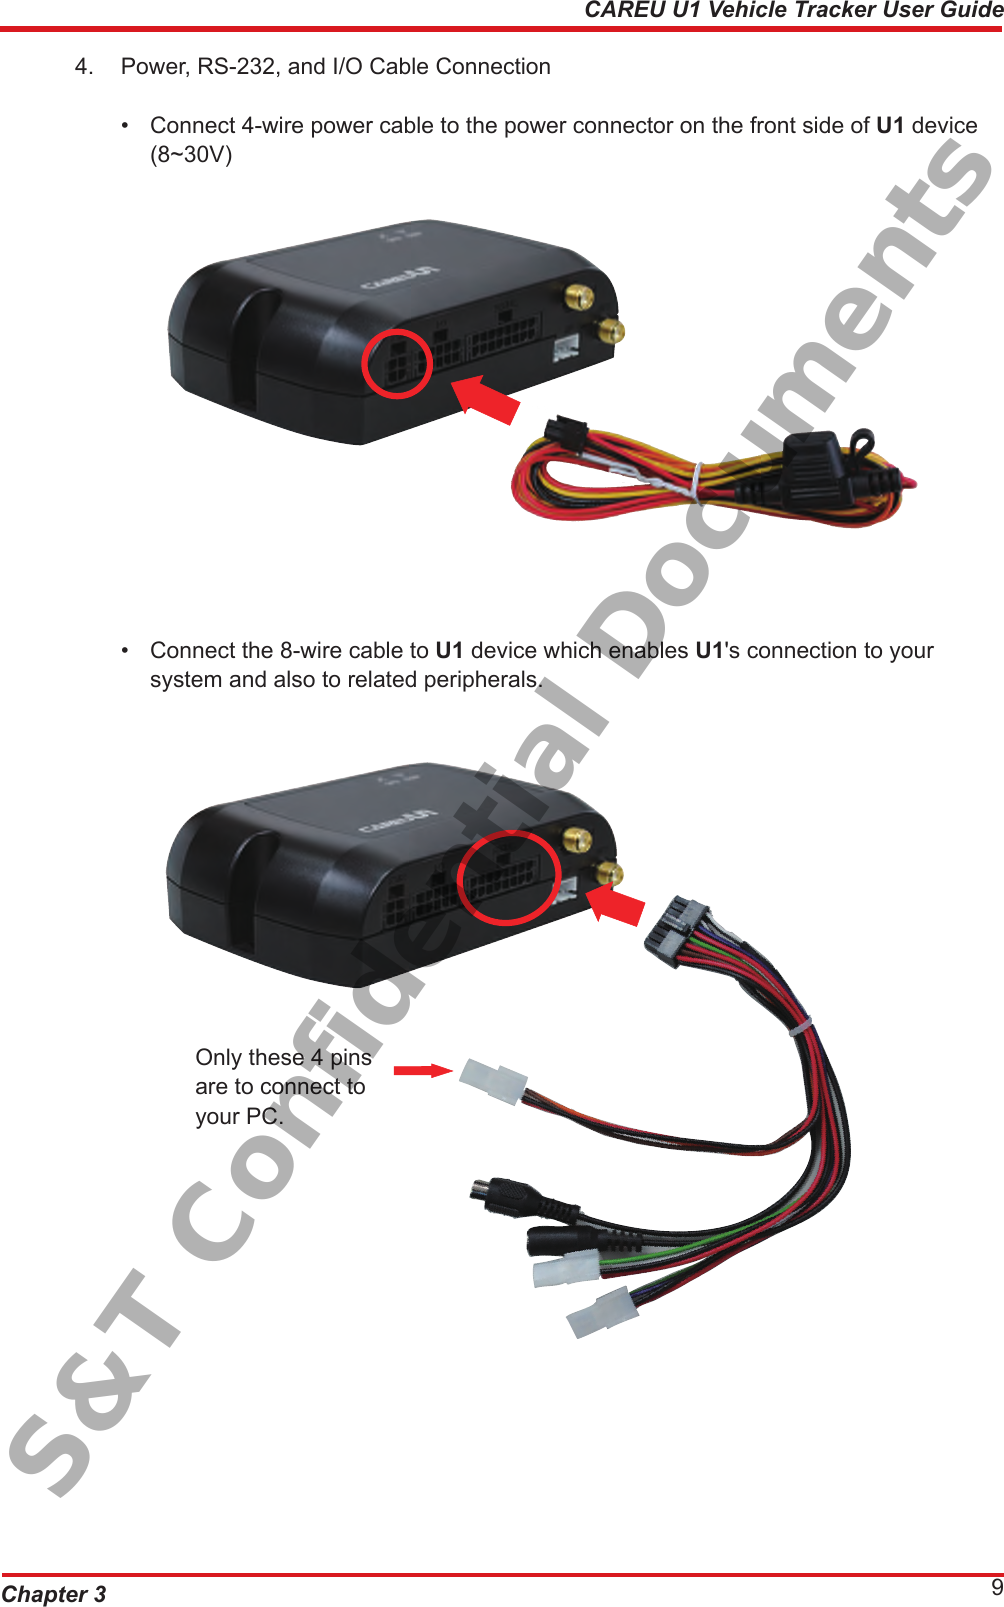 Chapter 3 9CAREU U1 Vehicle Tracker User Guide4.  Power, RS-232, and I/O Cable Connection•  Connect 4-wire power cable to the power connector on the front side of U1 device      (8~30V)•  Connect the 8-wire cable to U1 device which enables U1&apos;s connection to your        system and also to related peripherals.Only these 4 pins are to connect to your PC.S&amp;T Confidential Documents